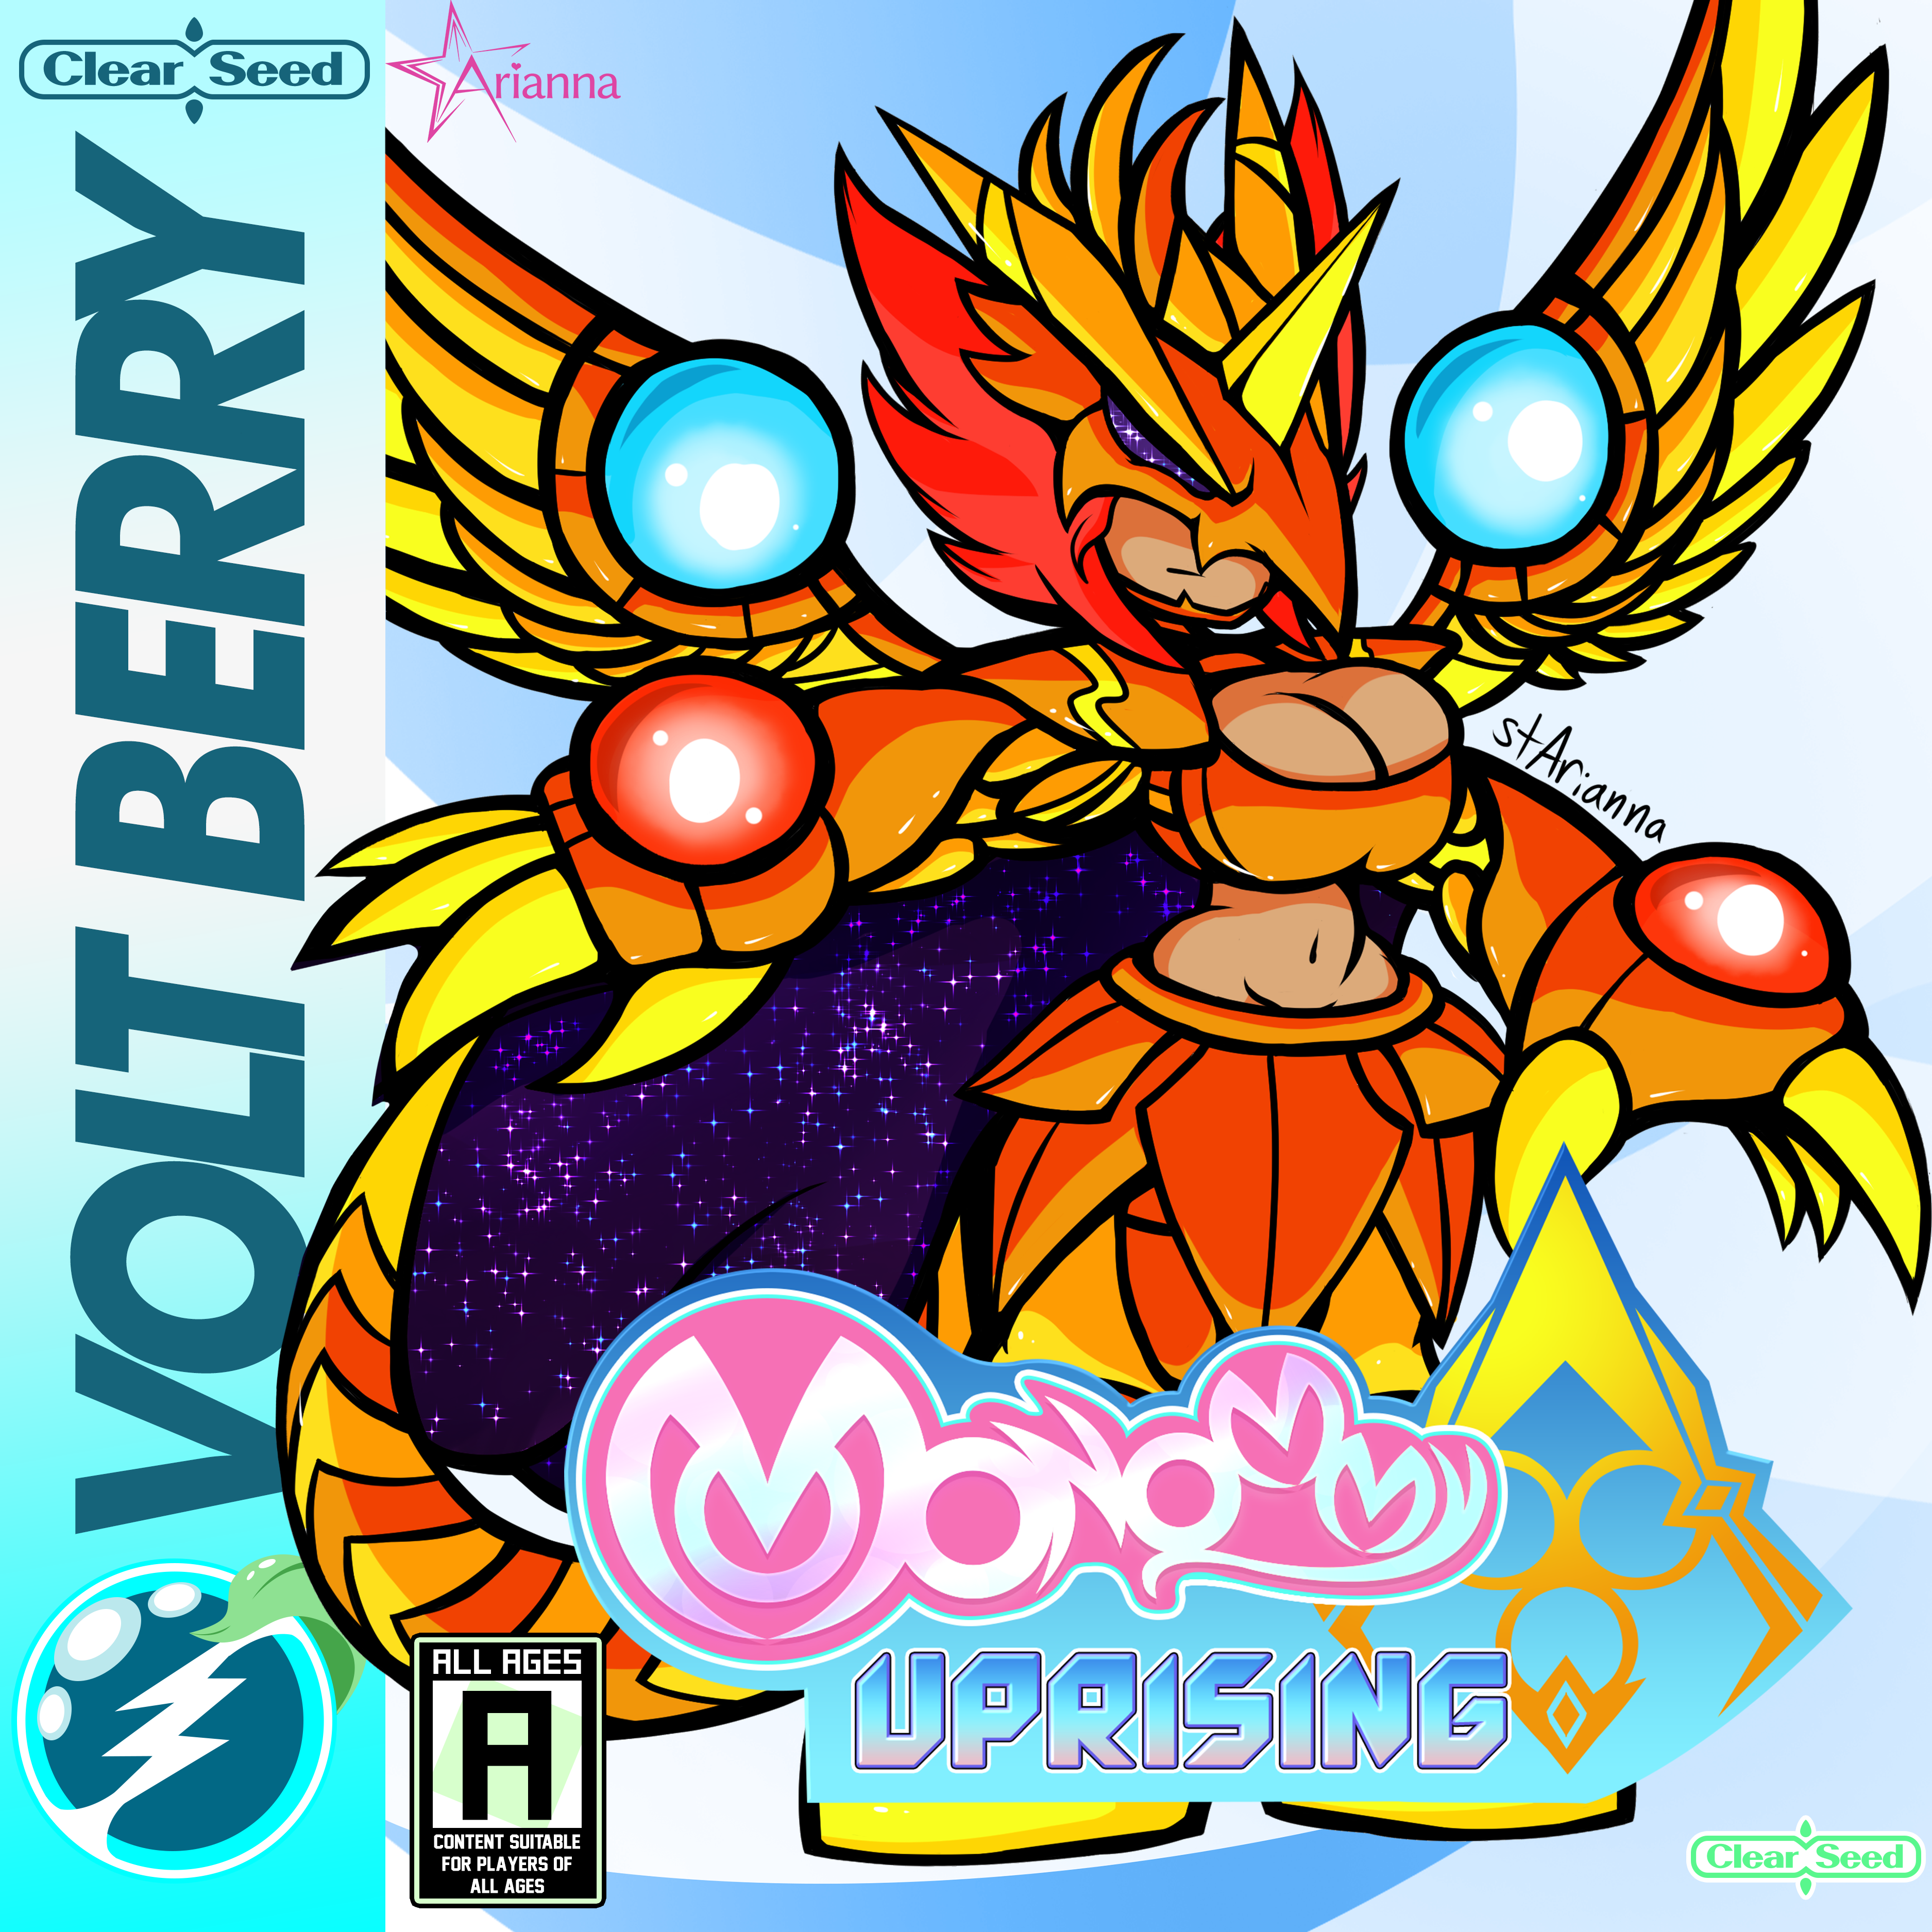 Monommy Uprising for the Volt Berry game system